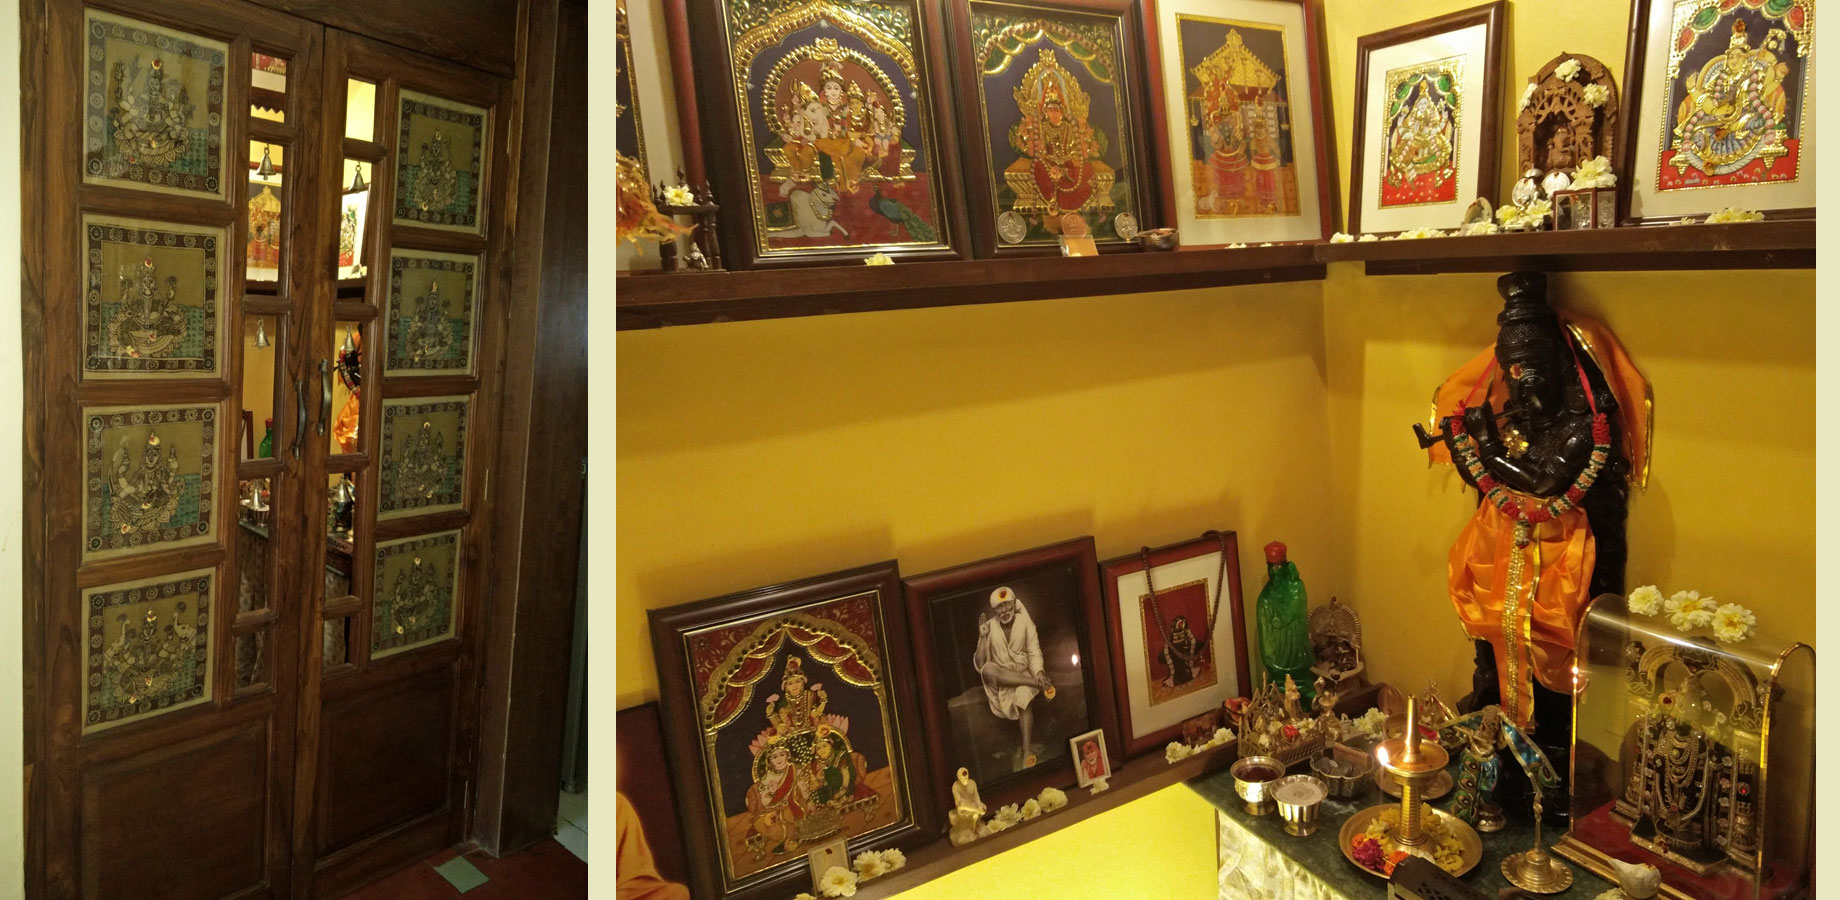 The puja room is adorned with beautiful original Tanjore paintings and lovingly enclosed with carved doors